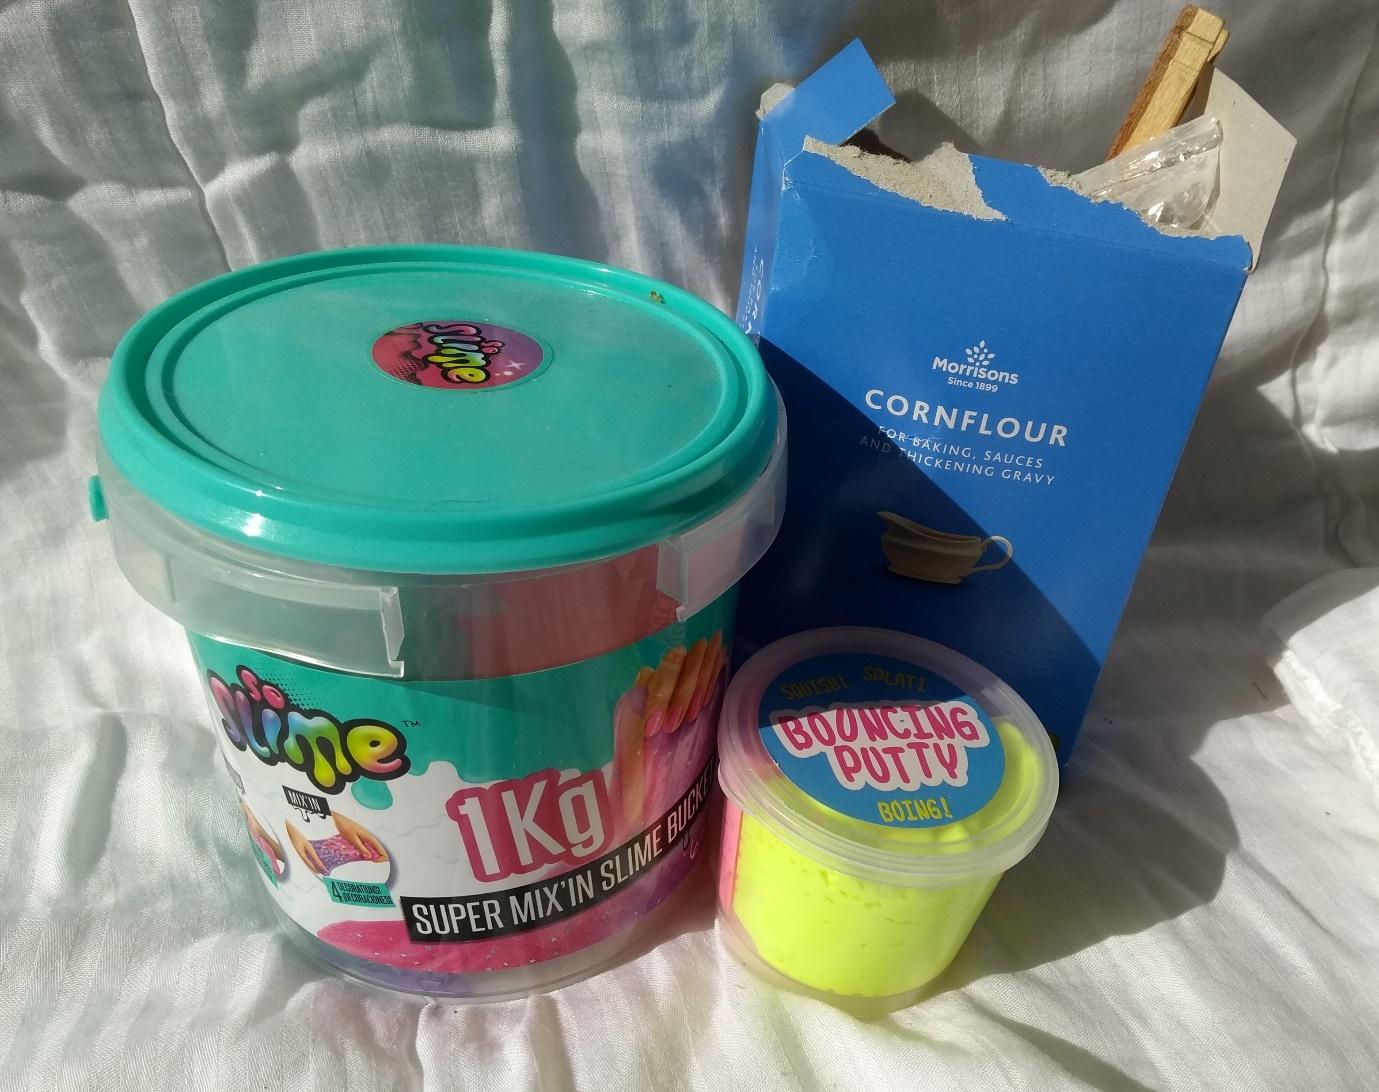 A 1KG tub of slime, a small pot of "bouncing putty" and a box of cornflour.